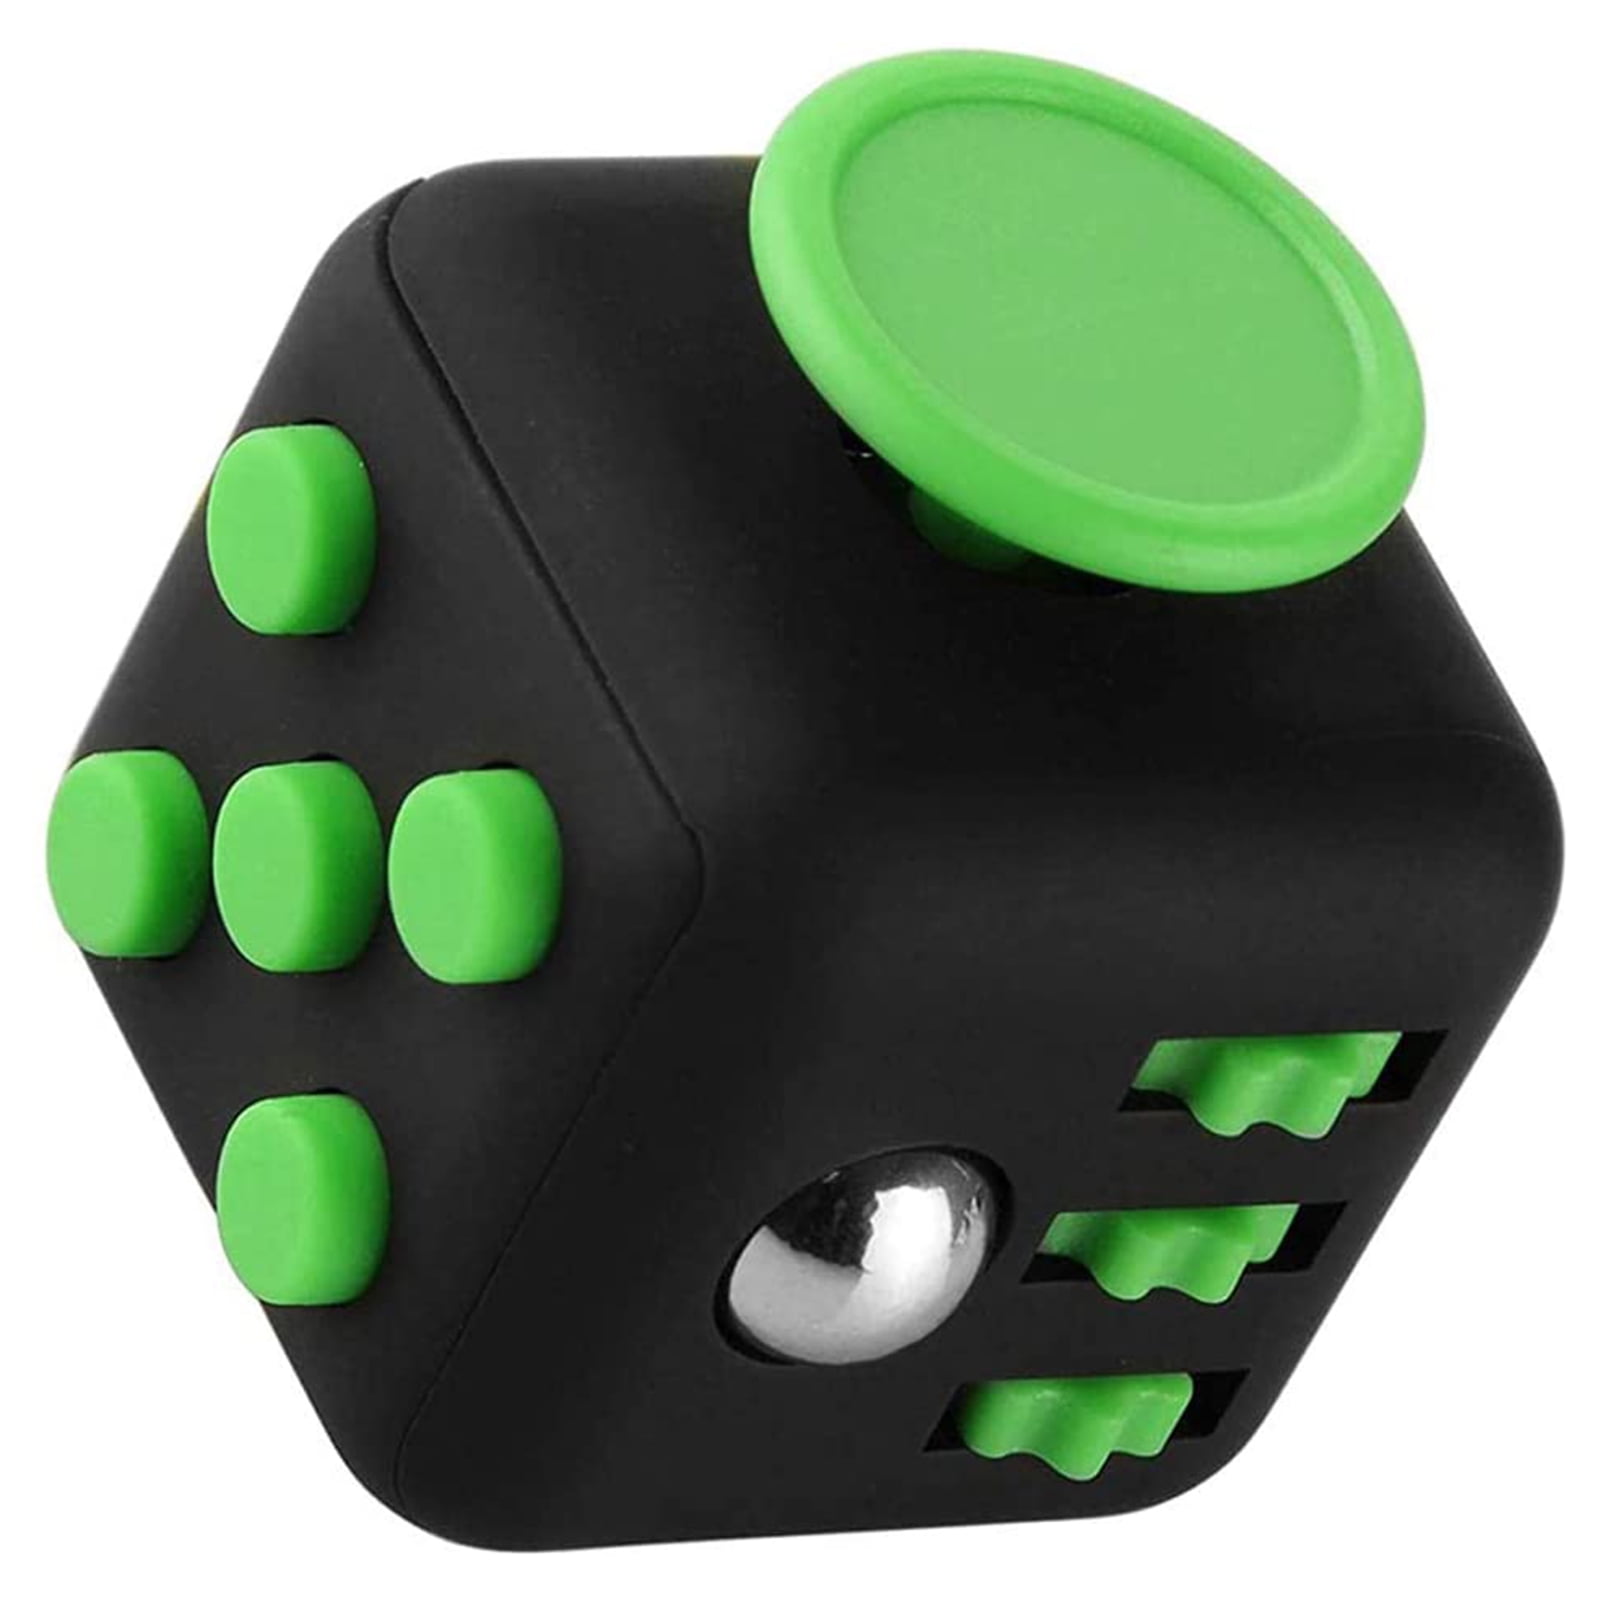 Finger Sensory Mini Dice Stress Relief Toy Fidget Anxiety Cube for ADHD 